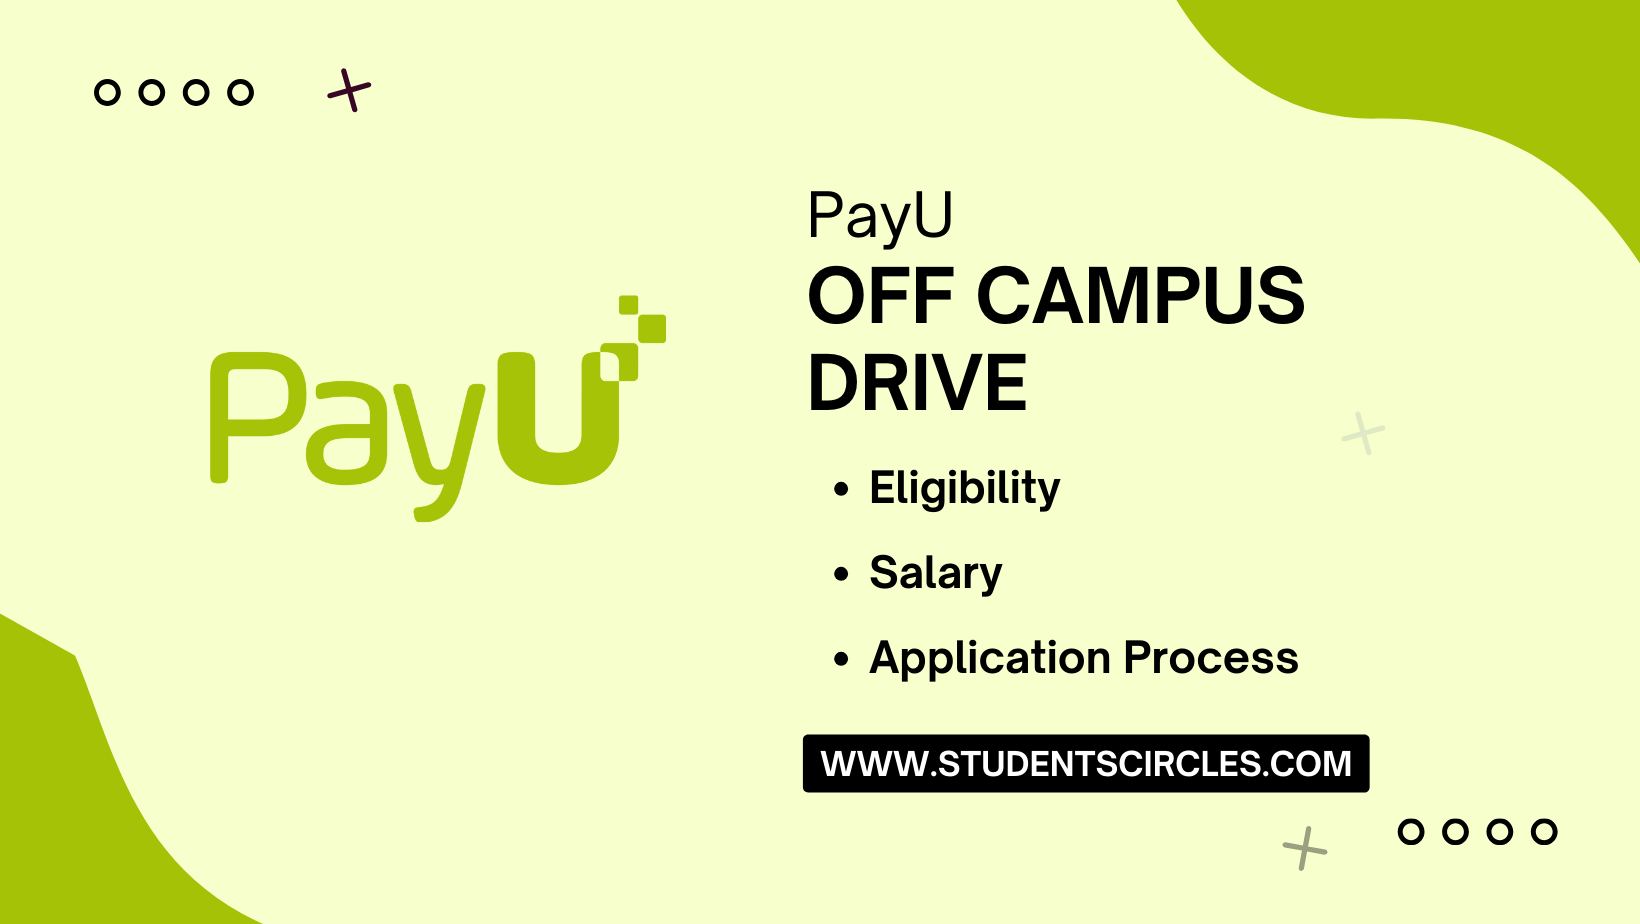 PayU Off Campus Drive